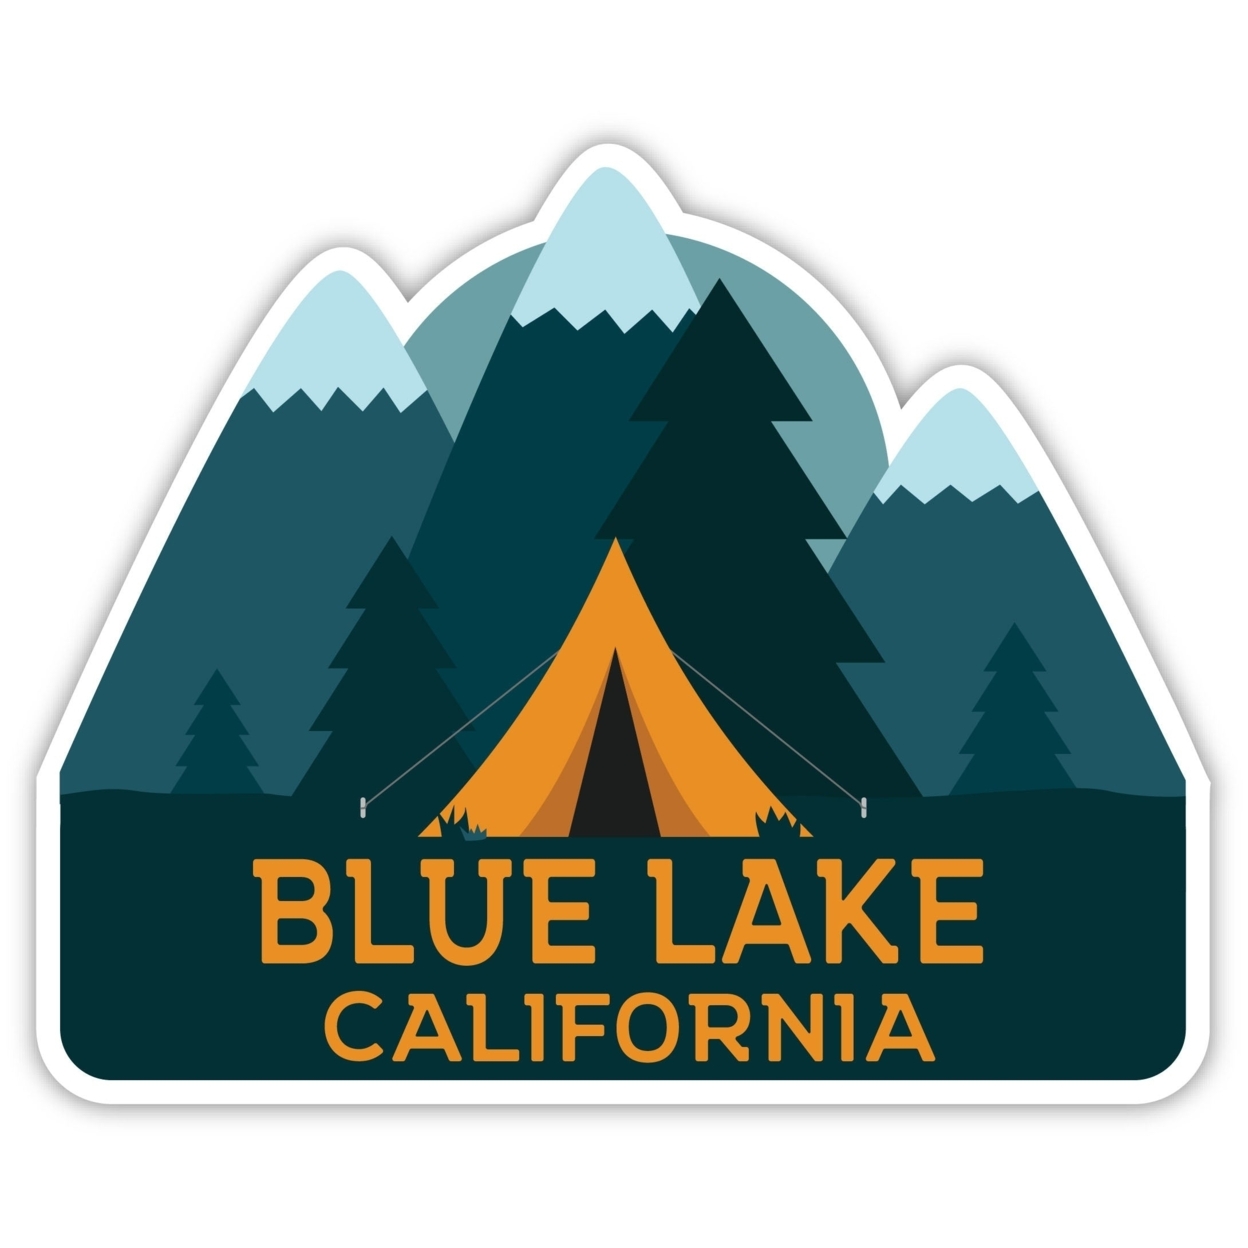 Blue Lake California Souvenir Decorative Stickers (Choose Theme And Size) - 4-Pack, 6-Inch, Tent